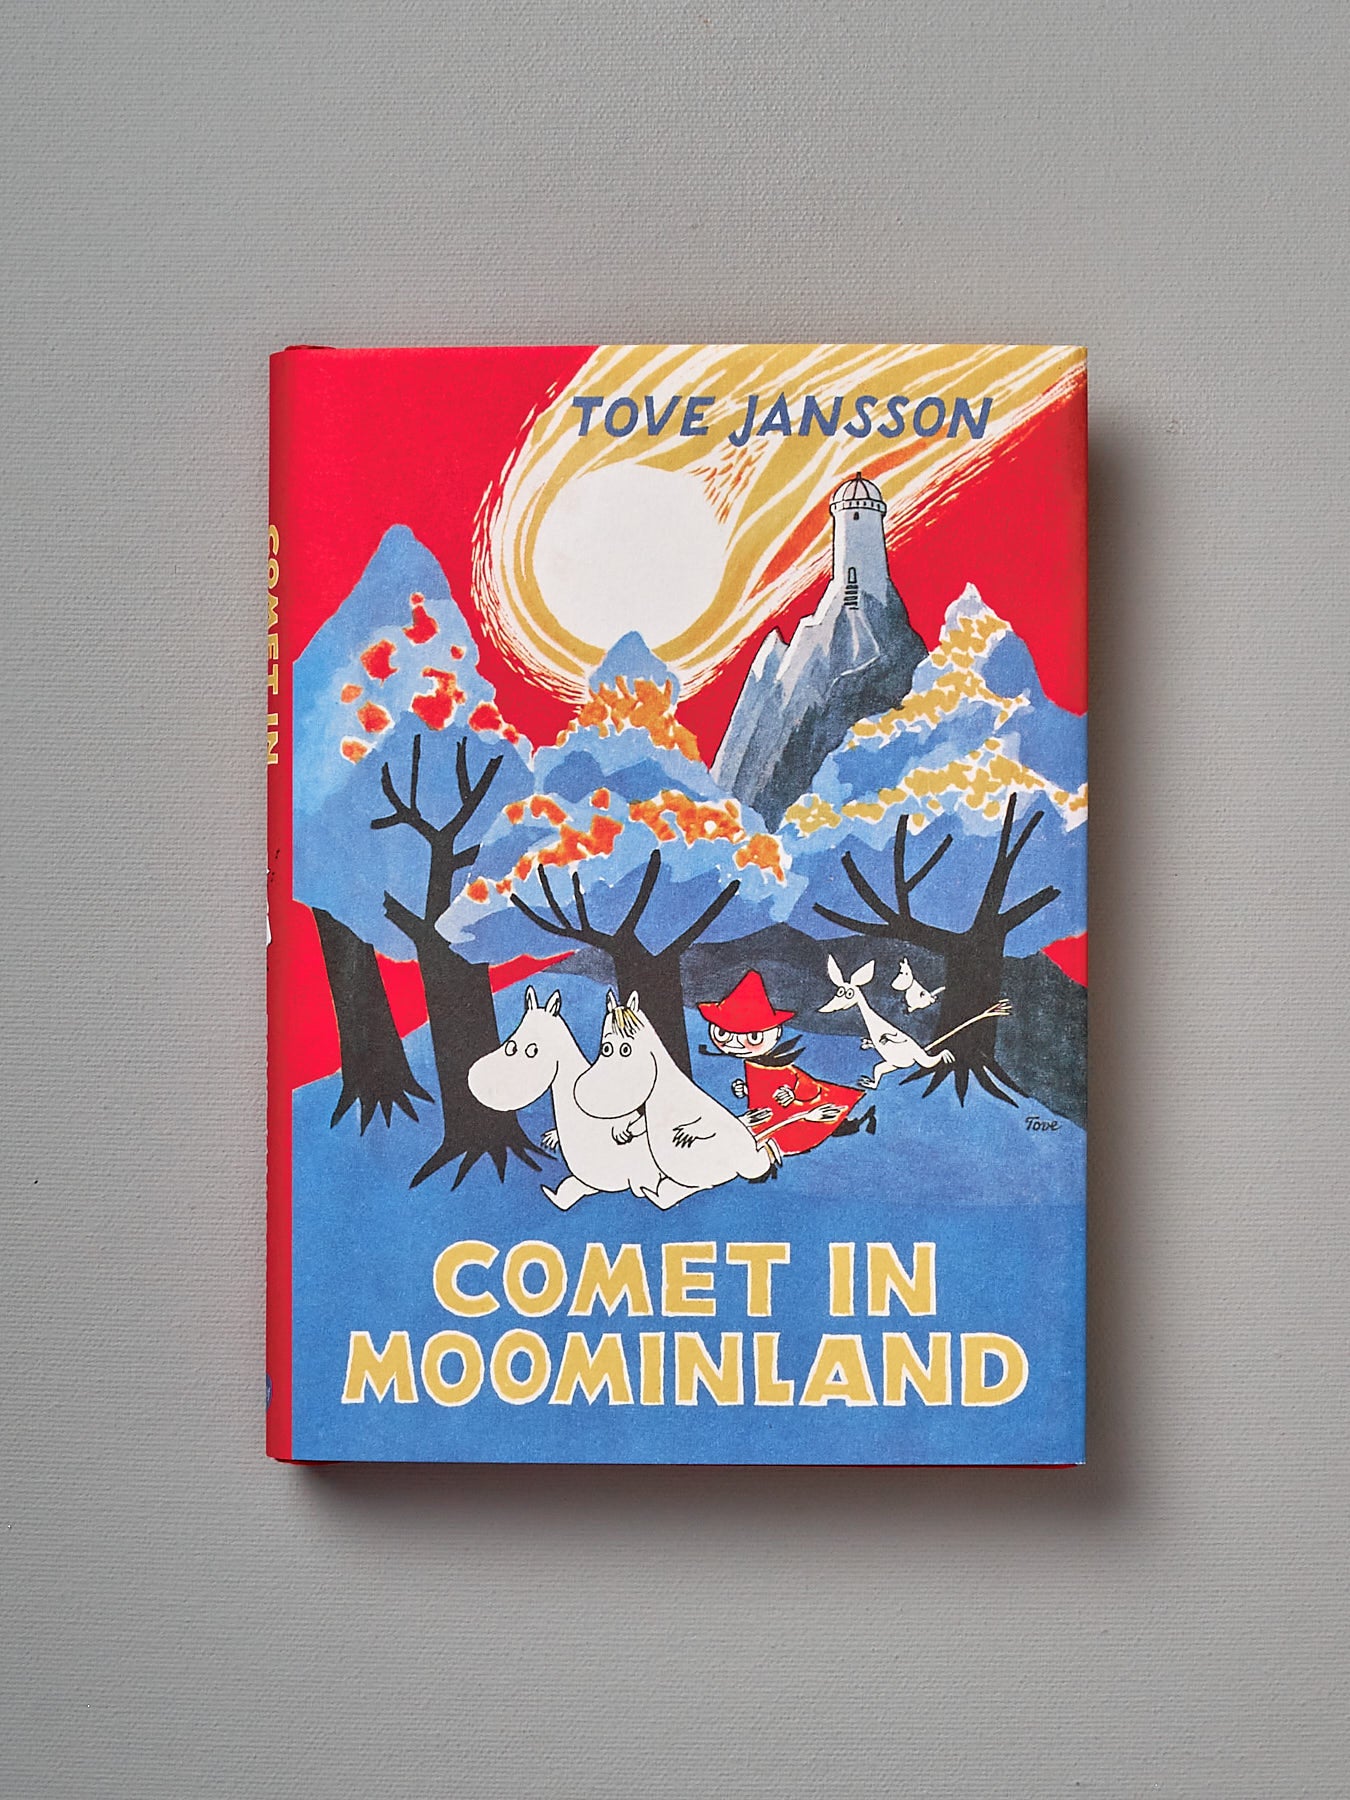 Comet in Moominland by Tove Jansson.